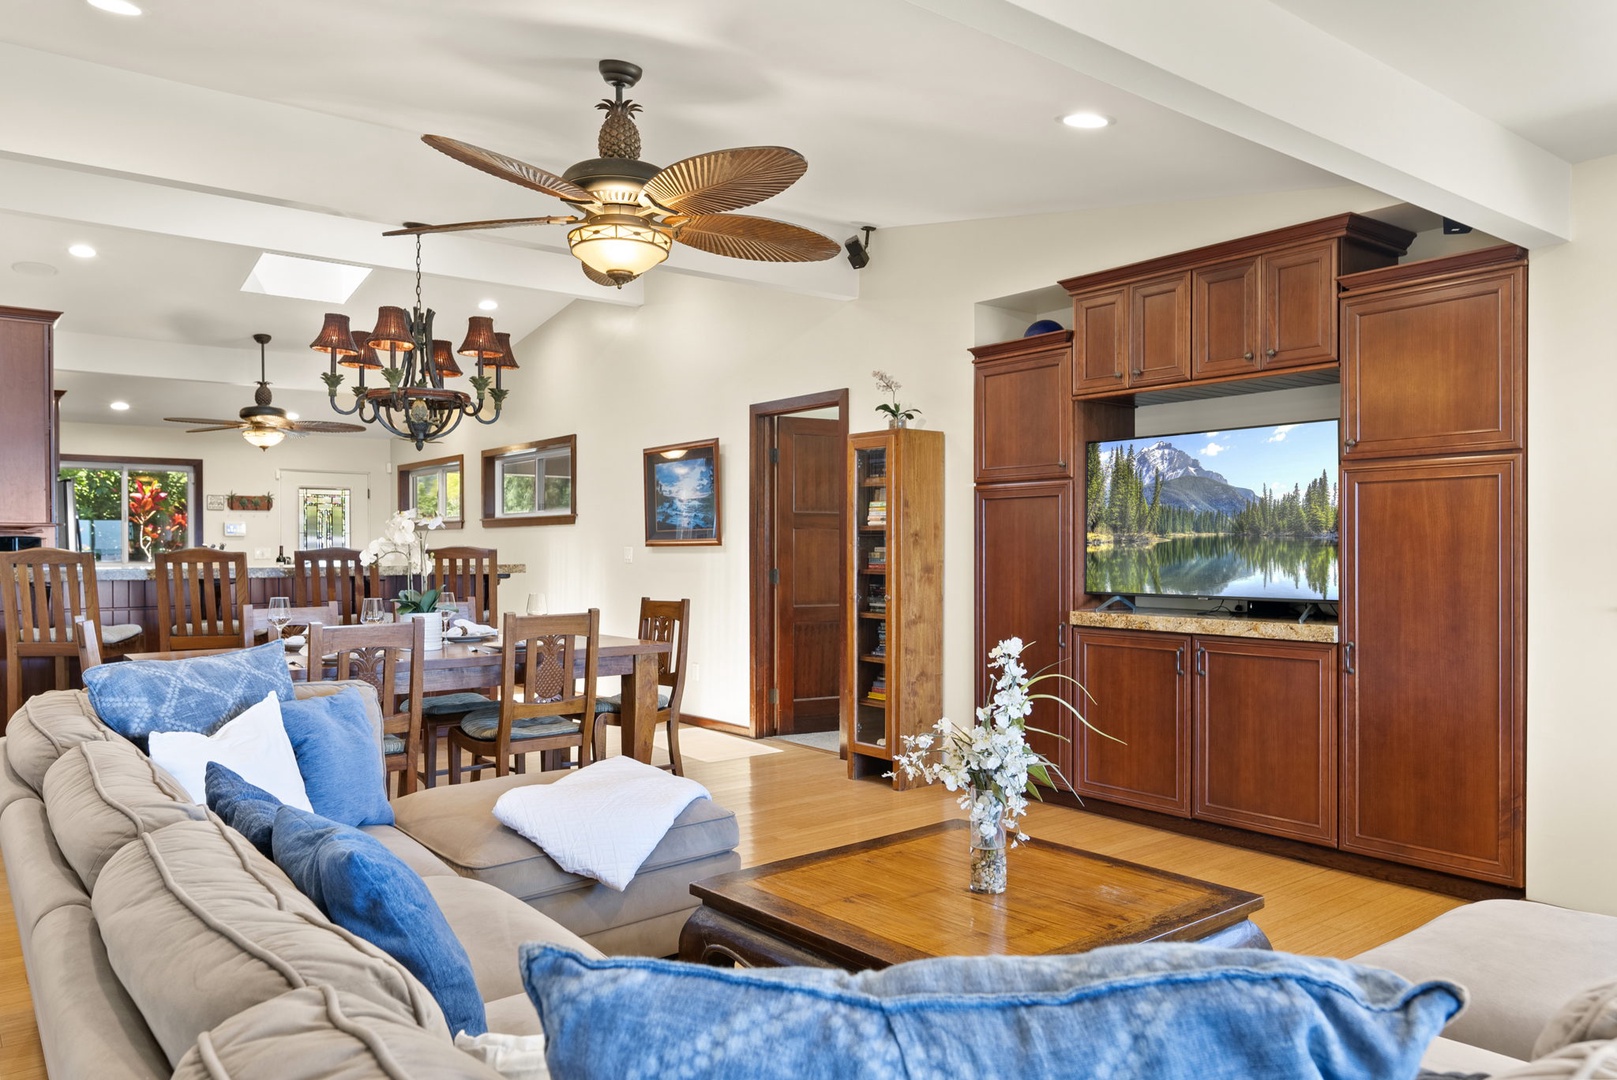 Waialua Vacation Rentals, Hale Oka Nunu - There's a flat screen TV for a movie night or to catch up on your favorite TV shows